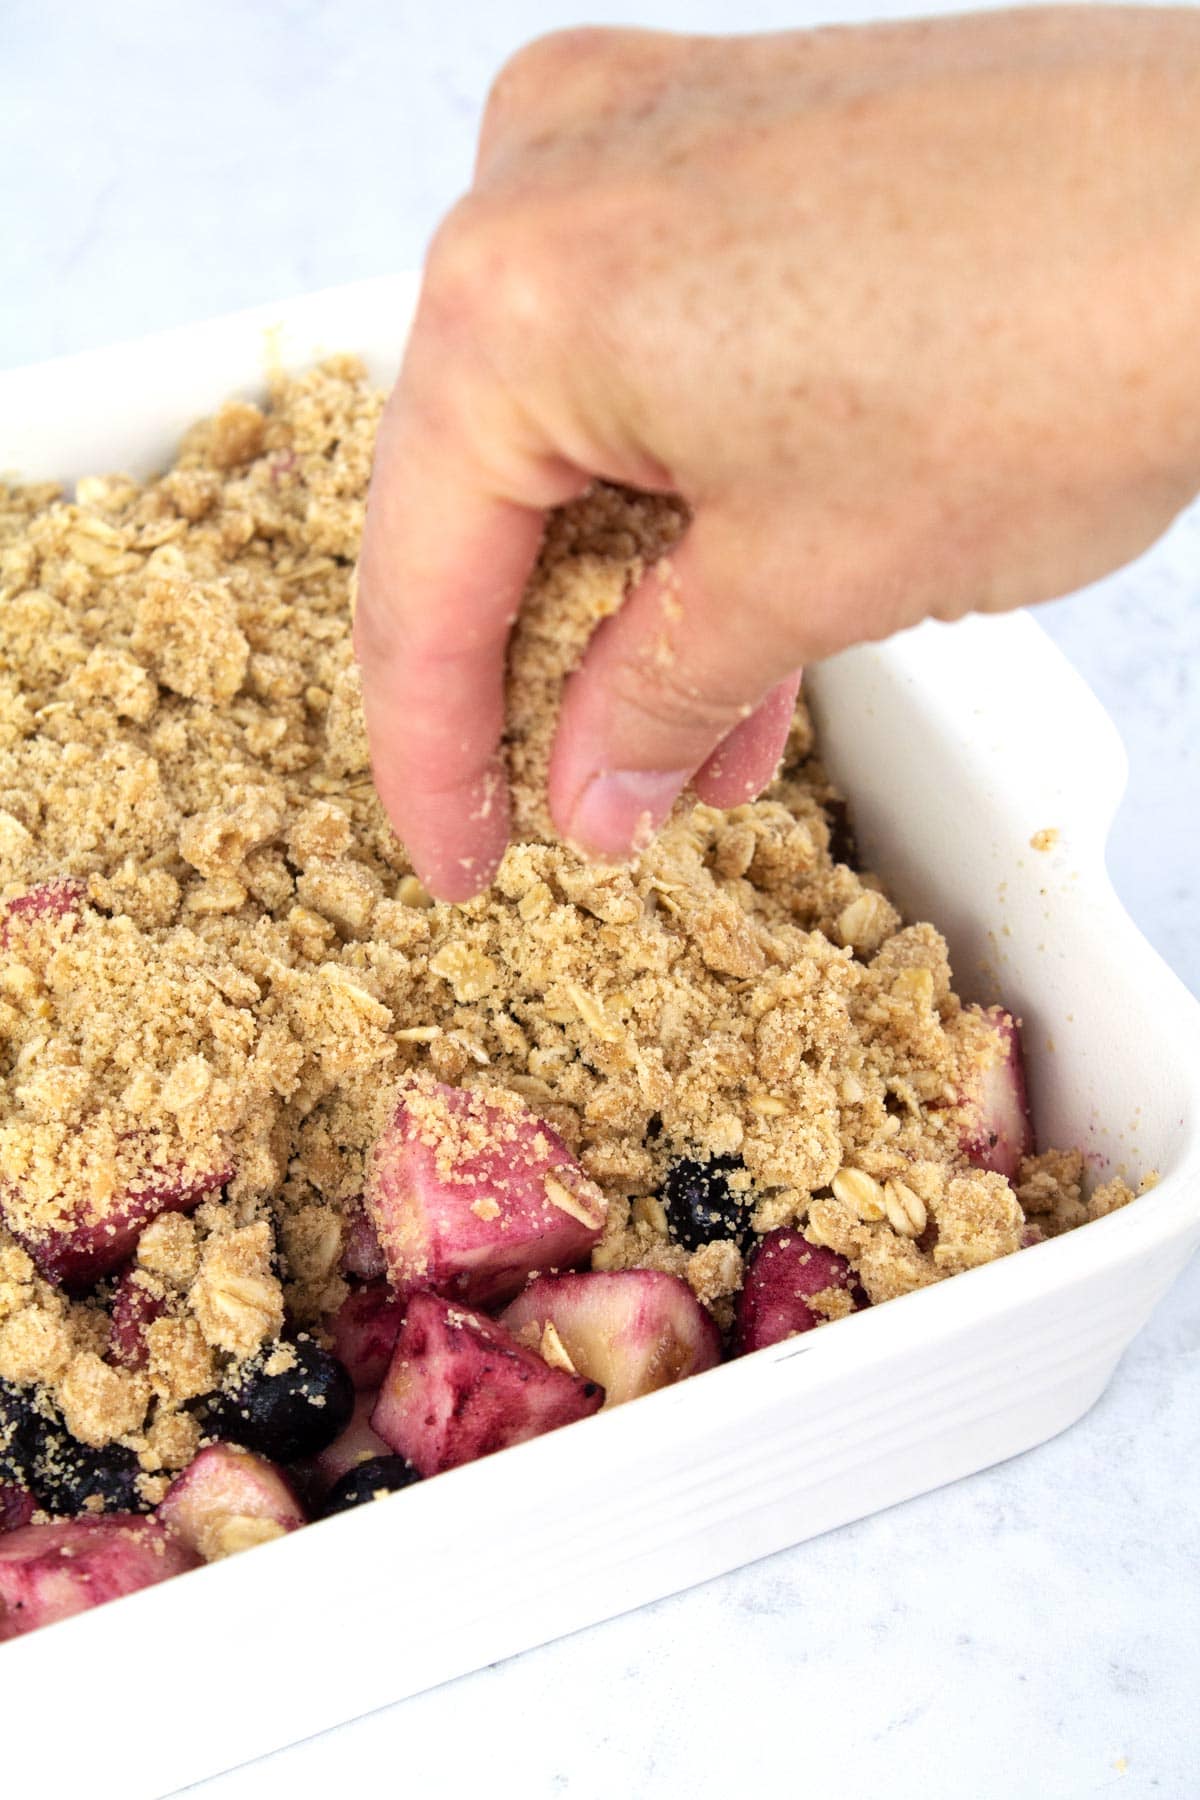 Hand sprinkling crumble on top of fruit in white baking pan.